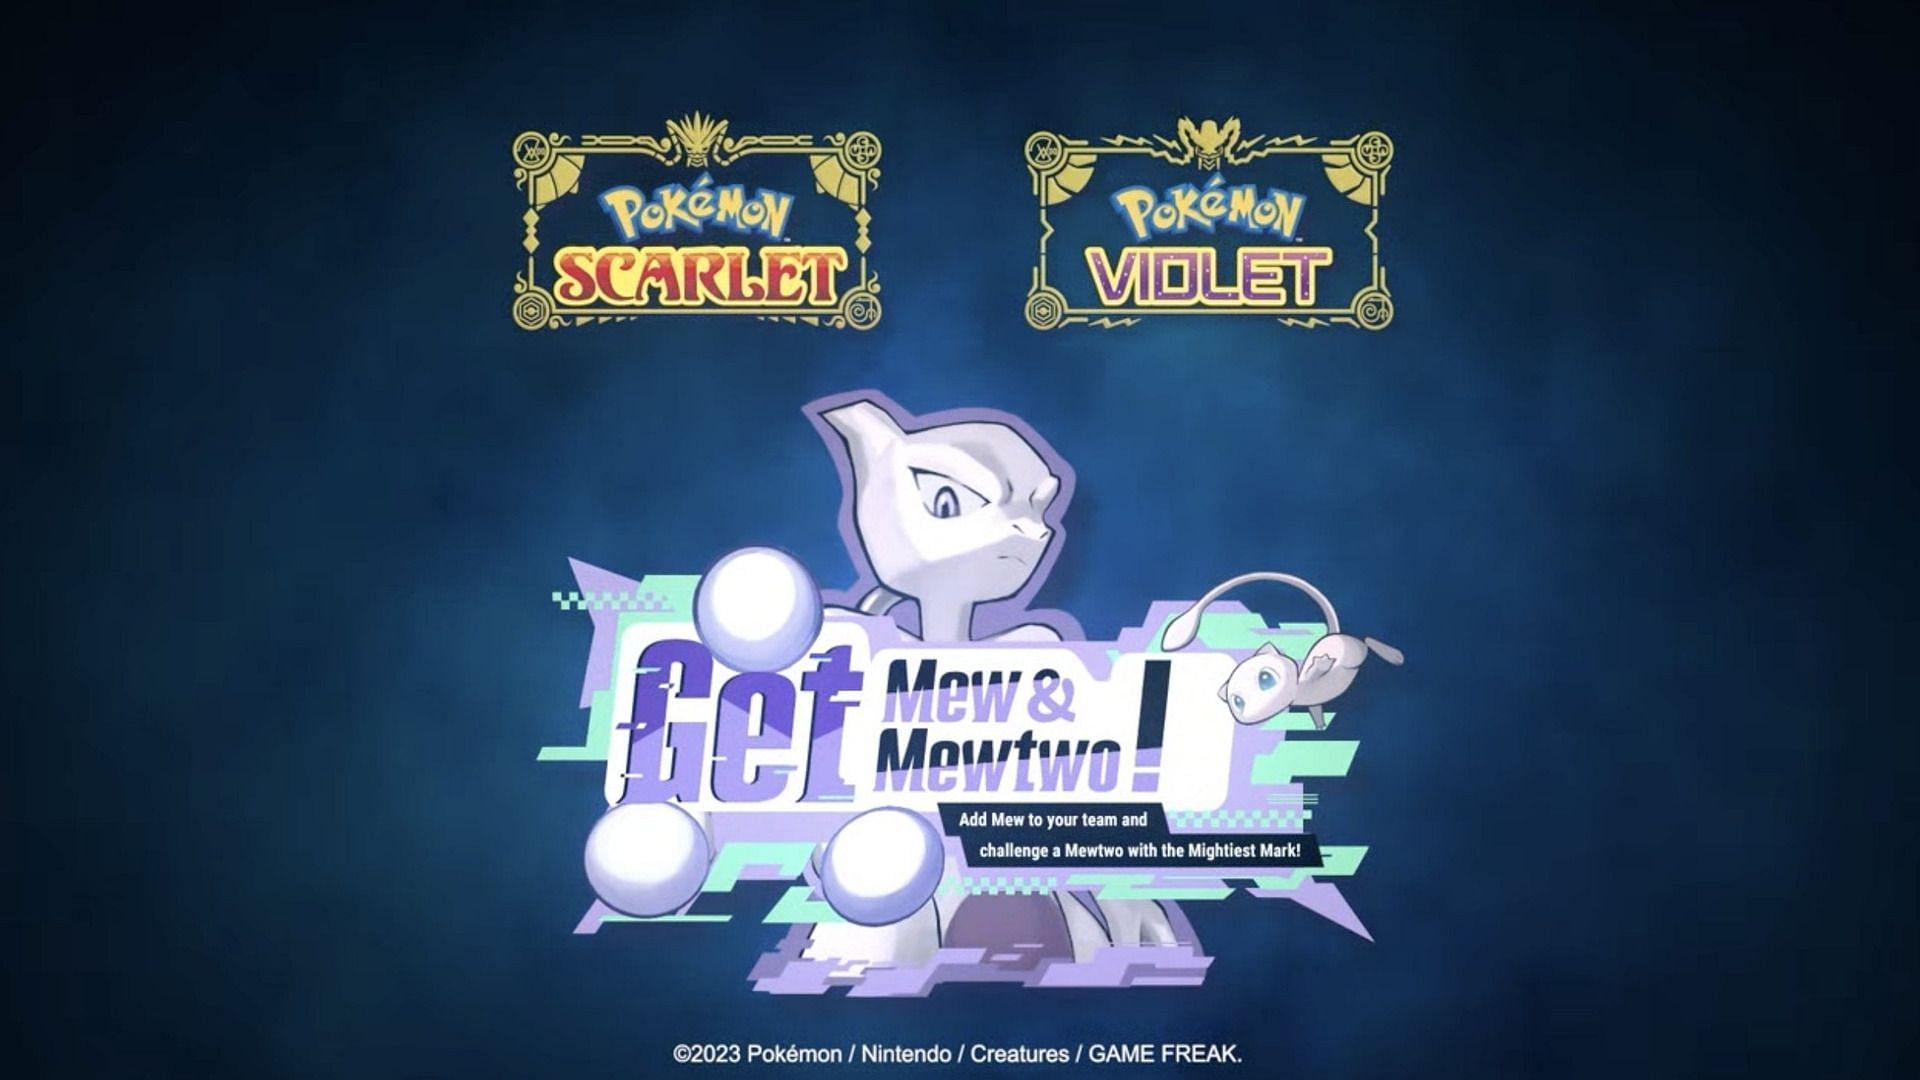 Official artwork for the Mighty Mewtwo event (Image via The Pokemon Company)